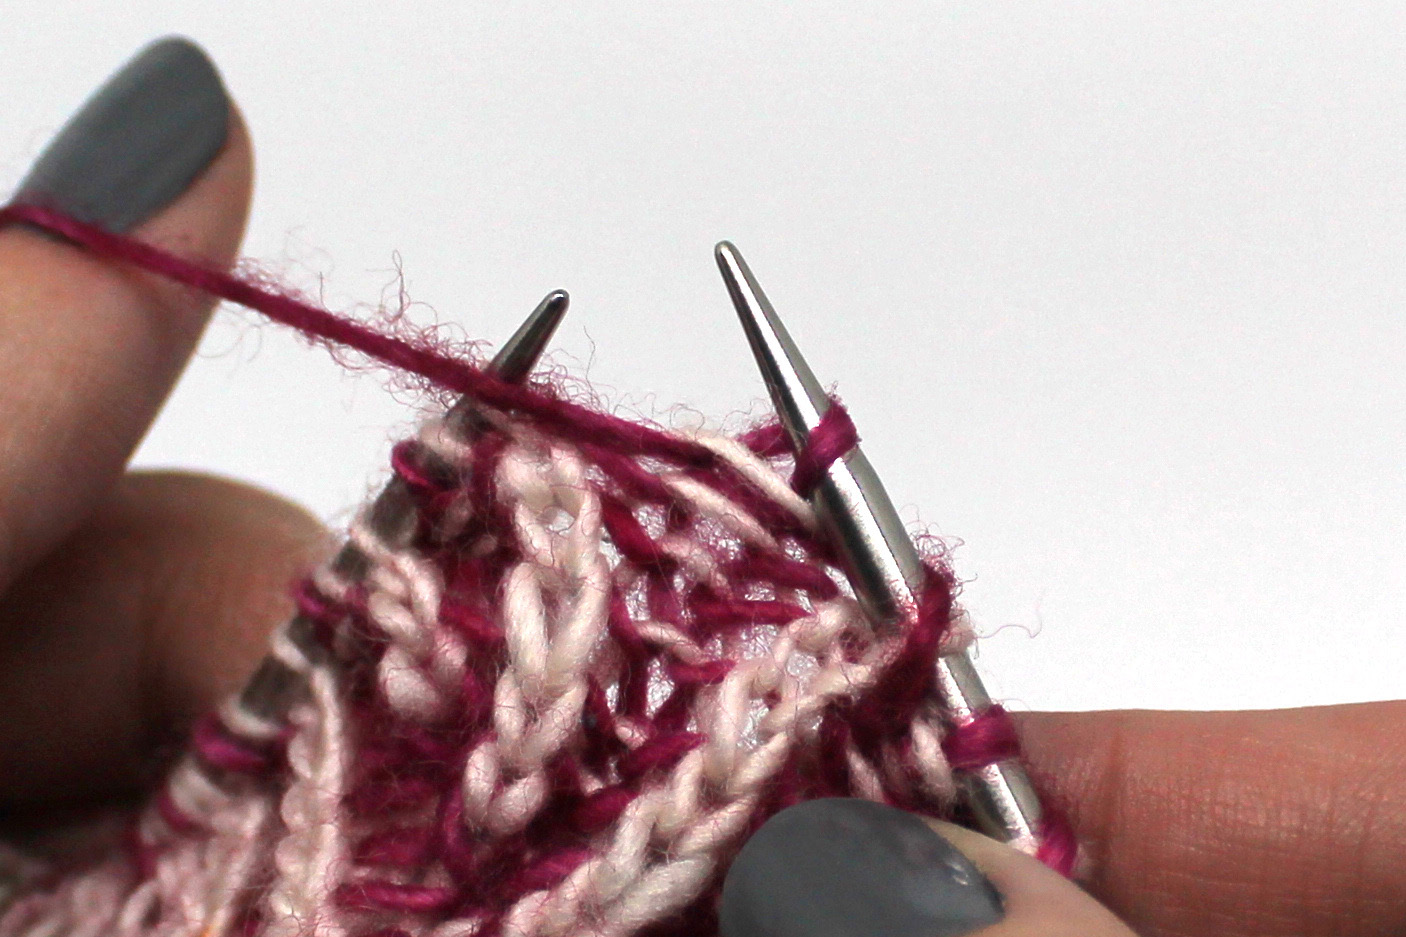 The completed brp stitch on the right hand needle